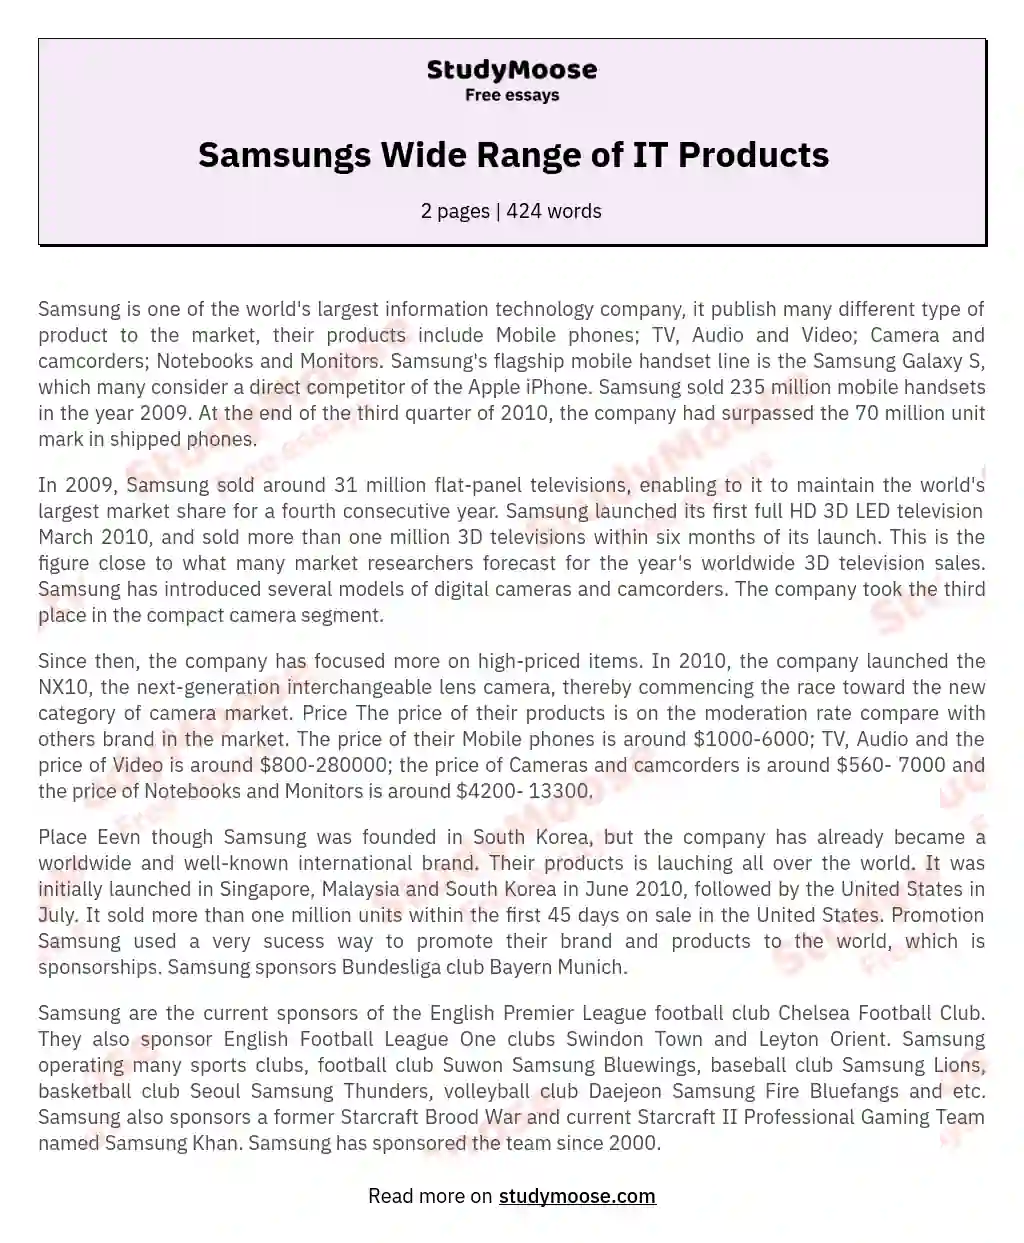 Samsungs Wide Range of IT Products essay